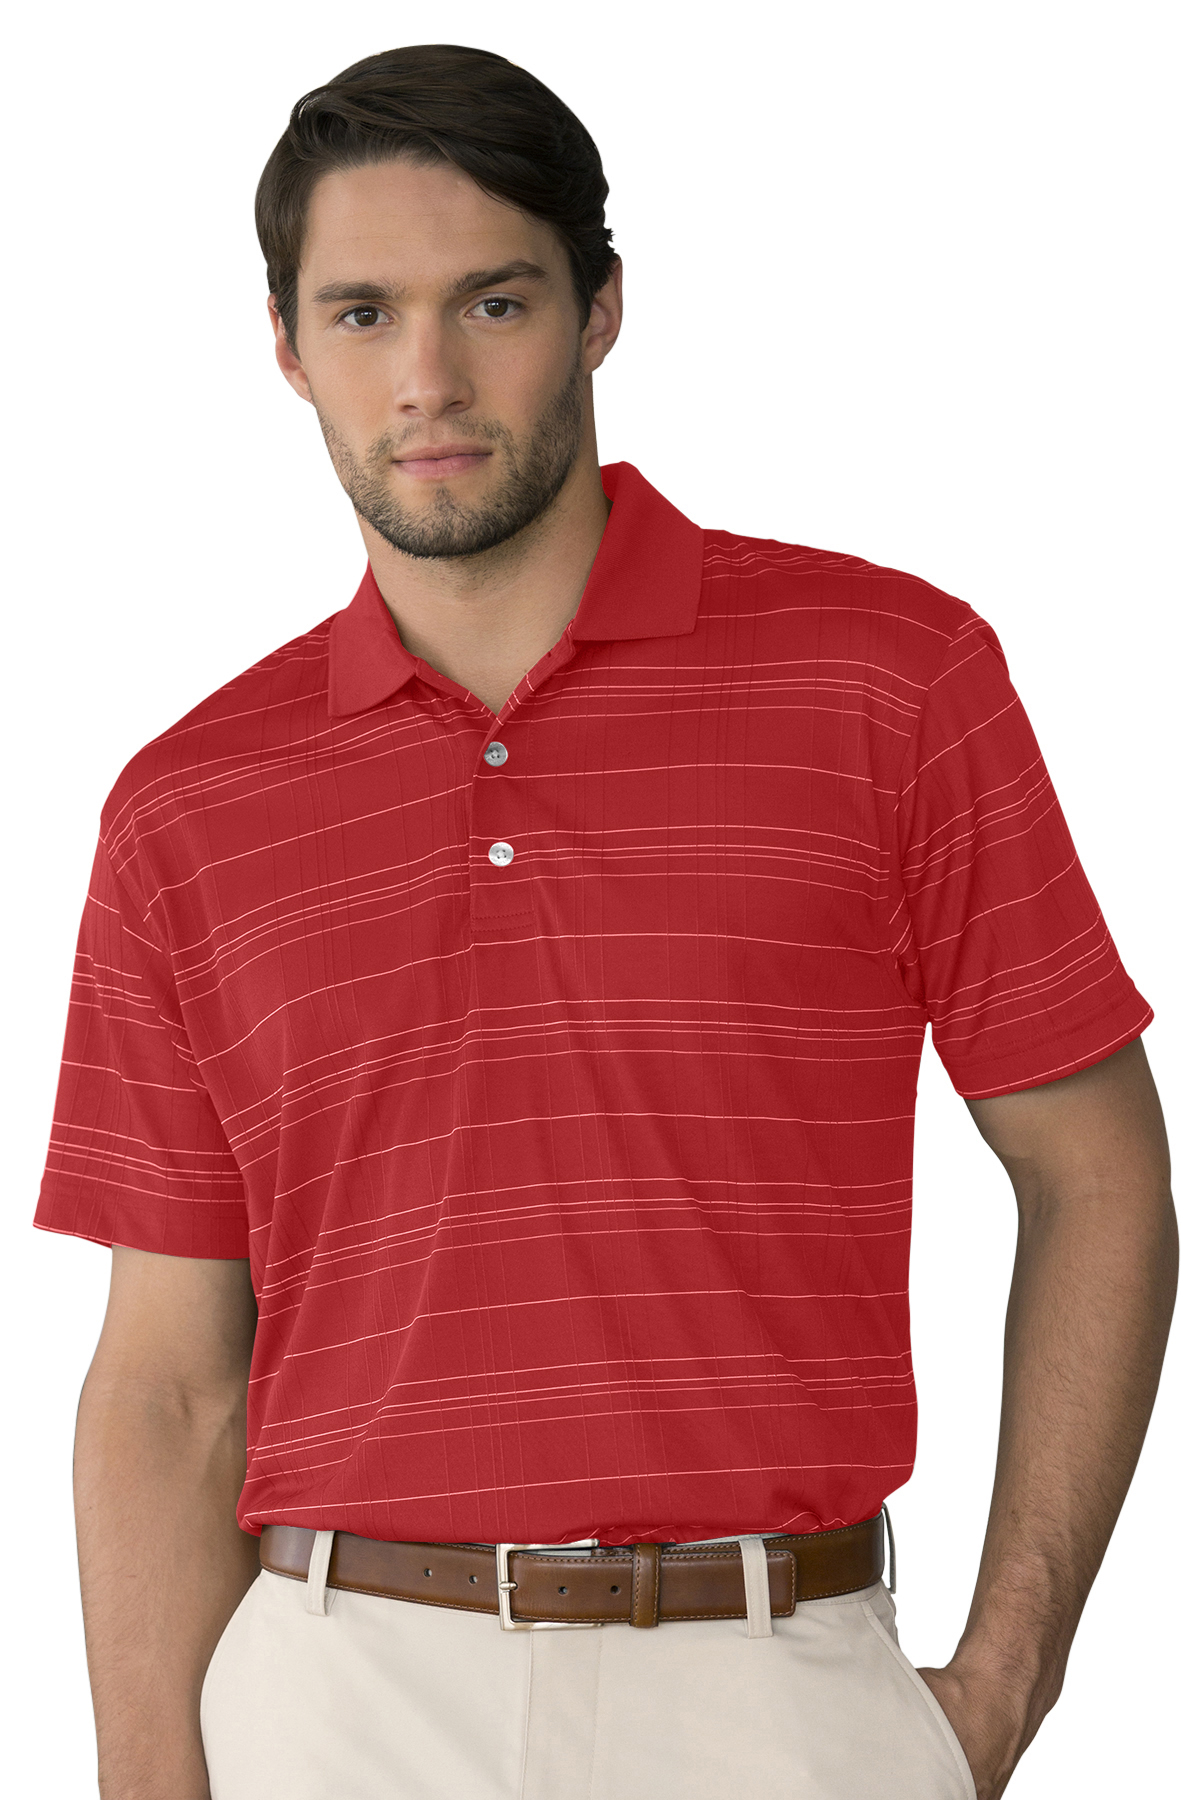 click to view Sport Red/Grey/White